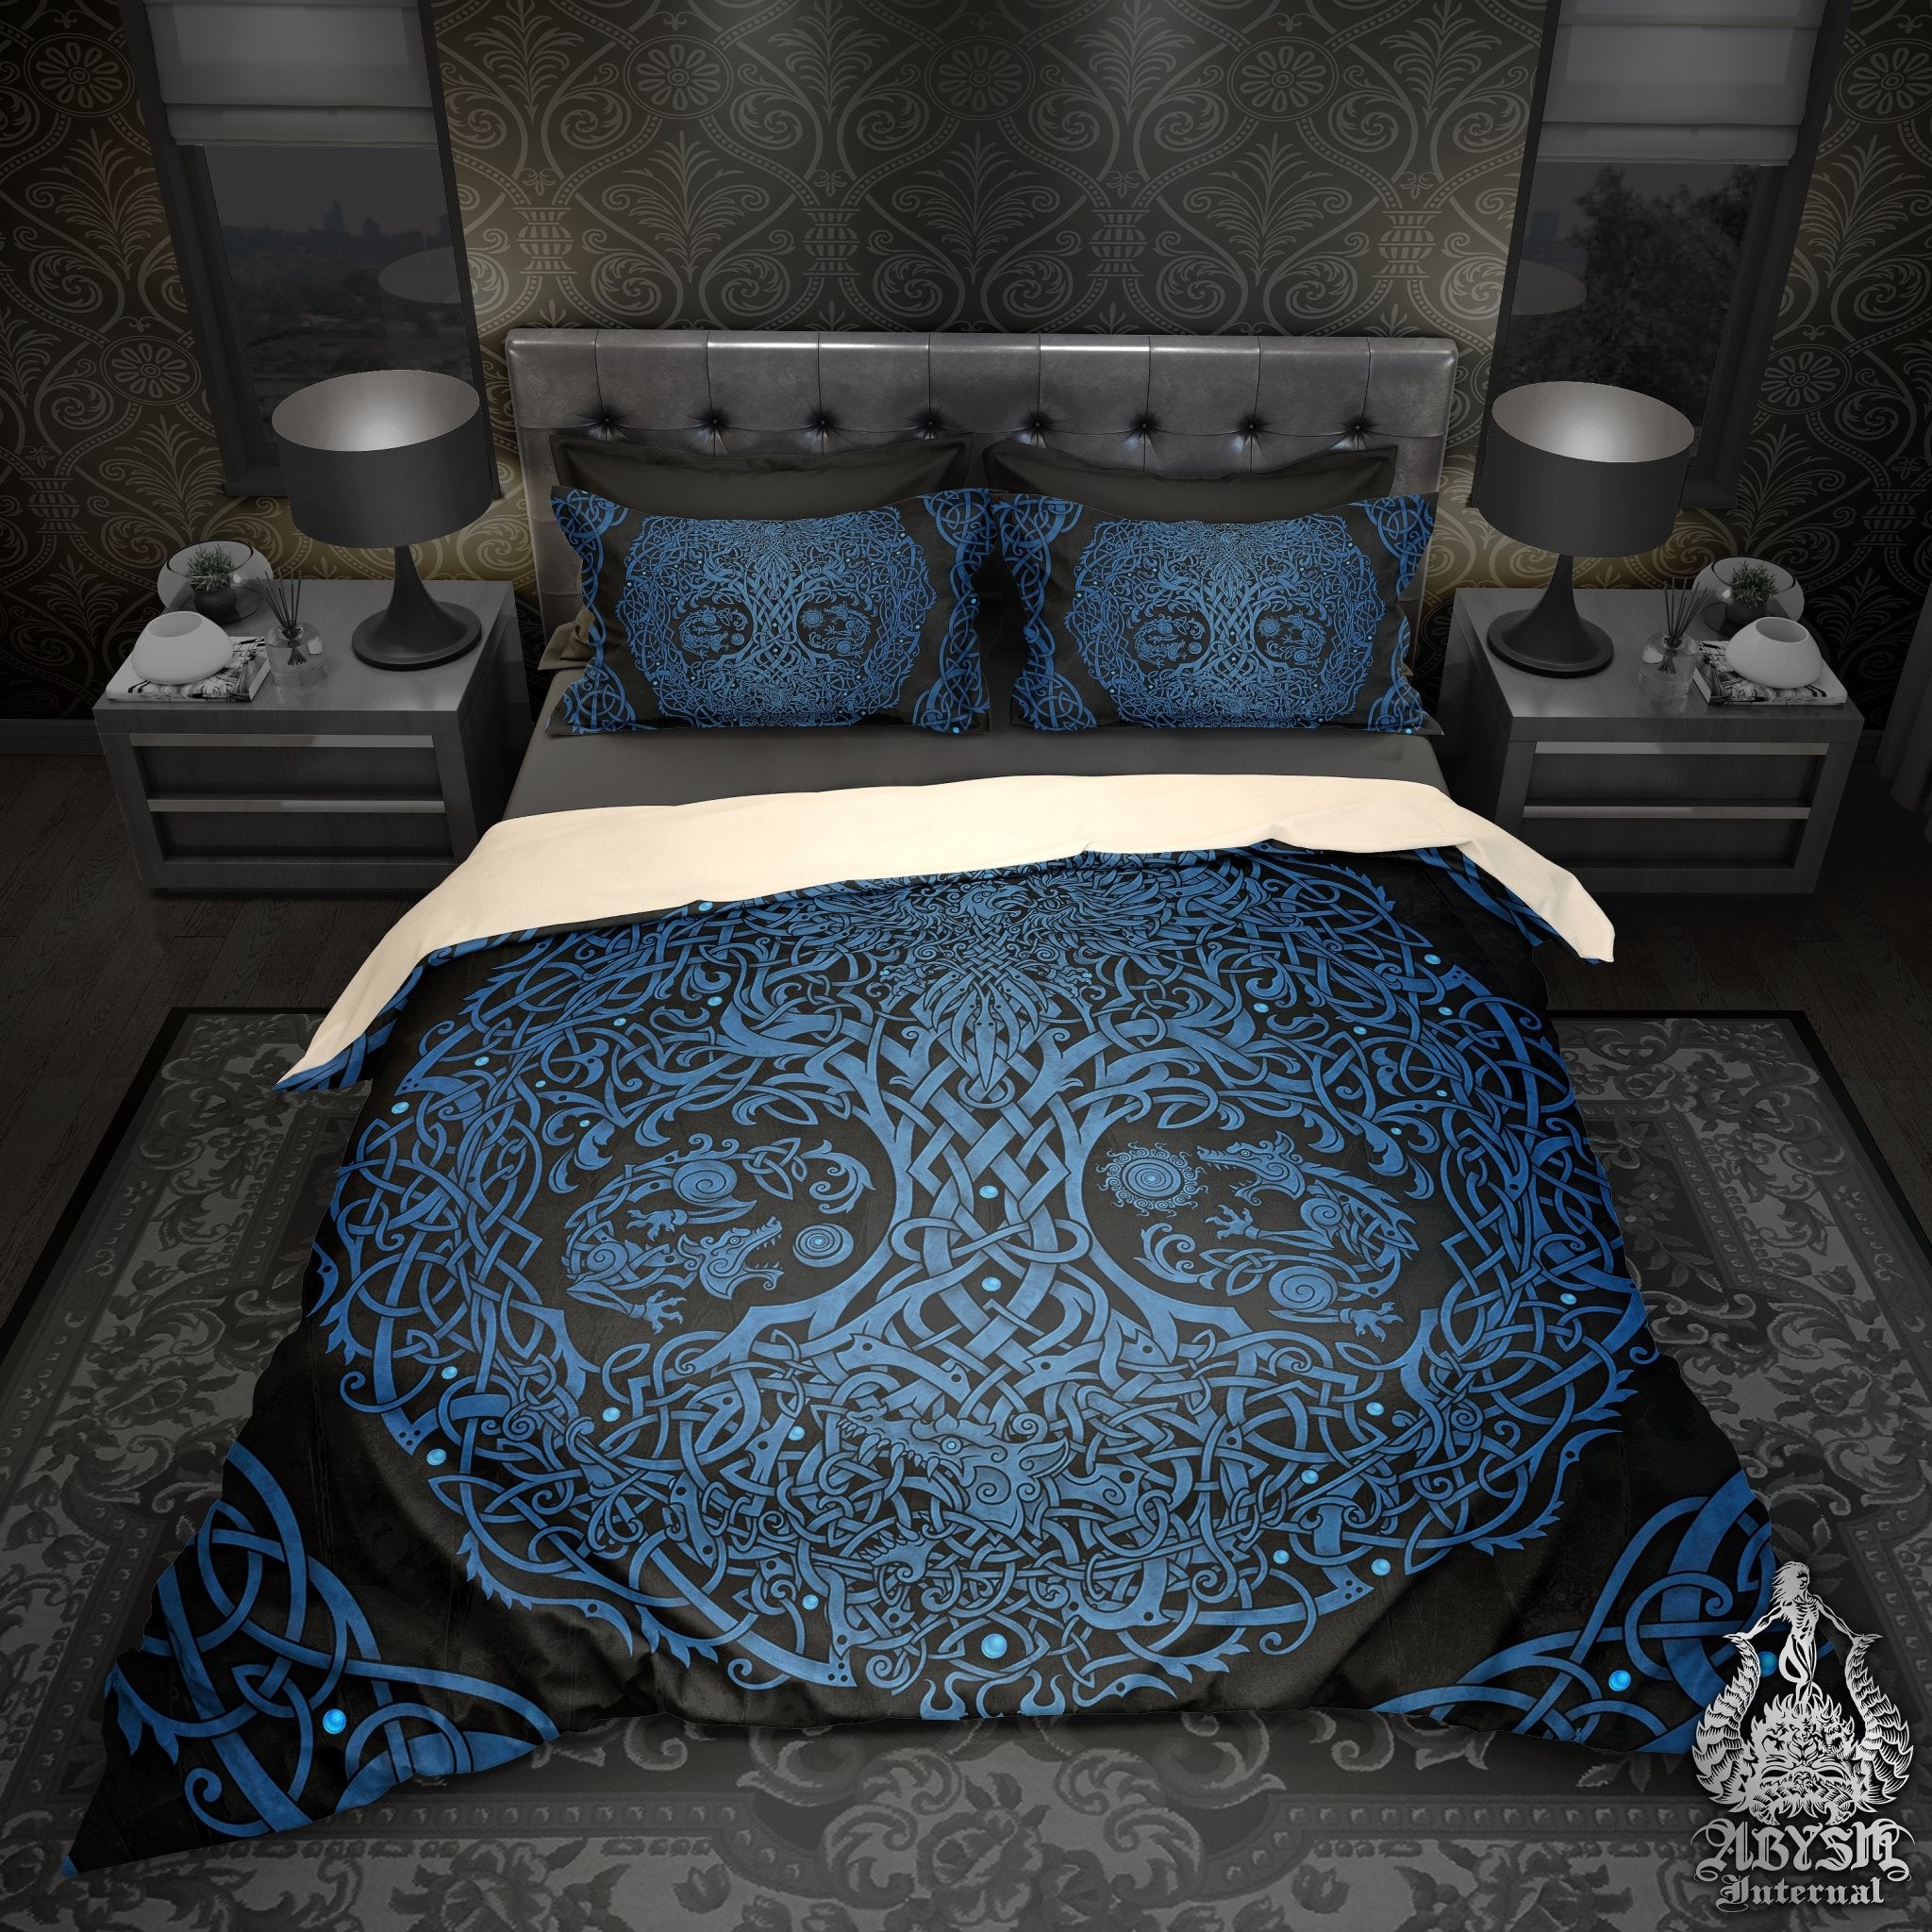 Viking Bedding Set, Comforter and Duvet, Yggdrasil Bed Cover and Bedroom Decor, Norse Art, King, Queen and Twin Size - Black and Blue - Abysm Internal